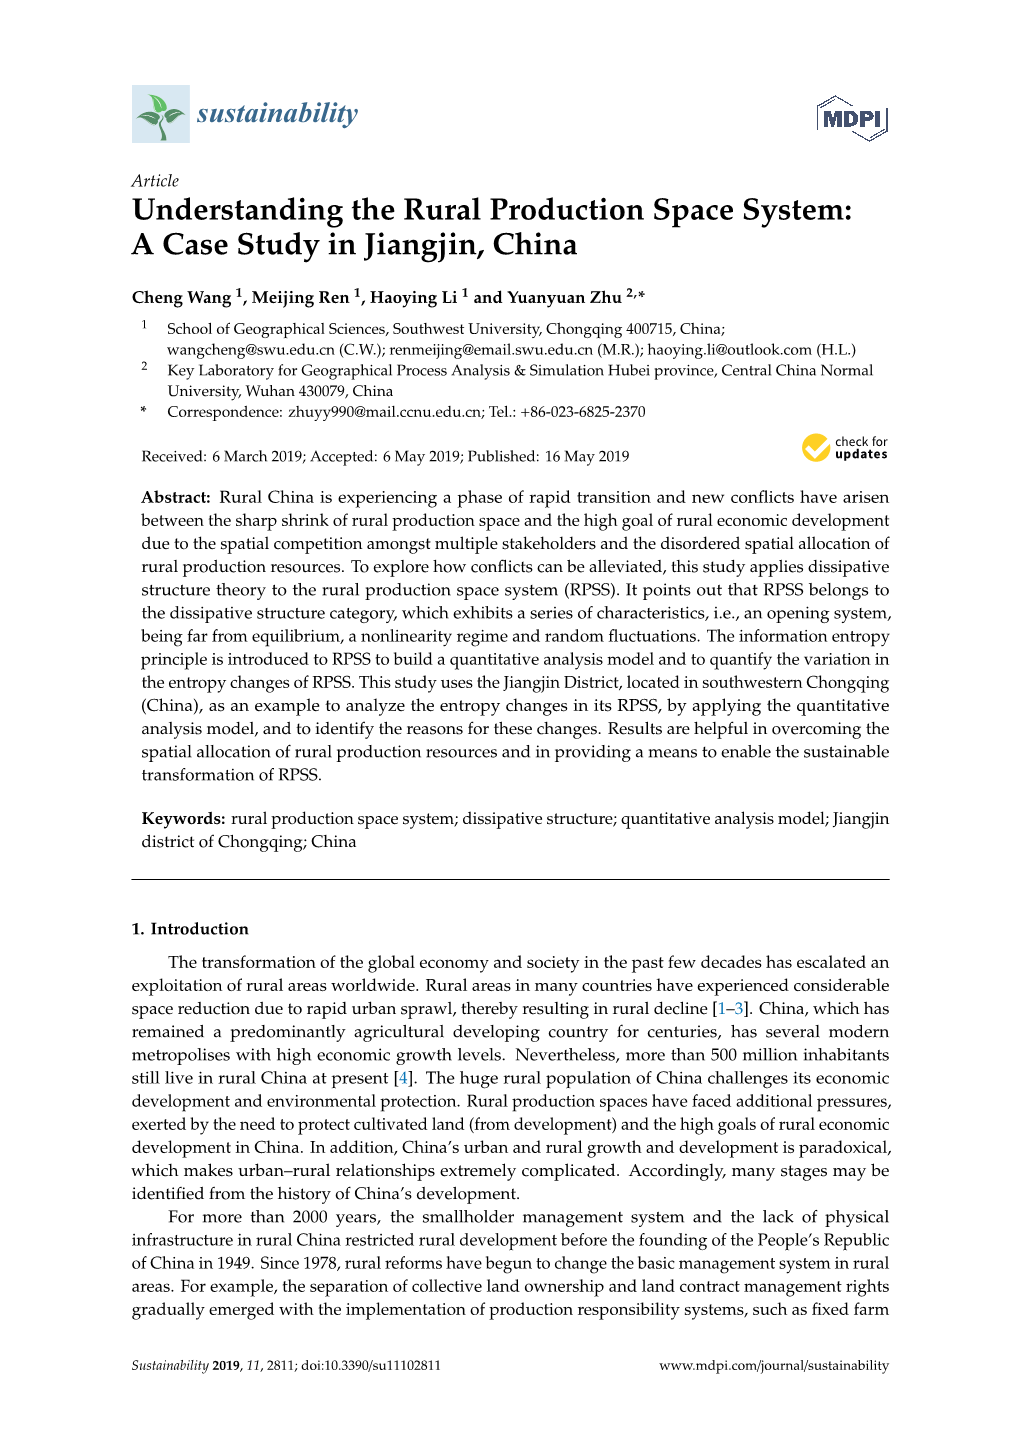 Understanding the Rural Production Space System: a Case Study in Jiangjin, China